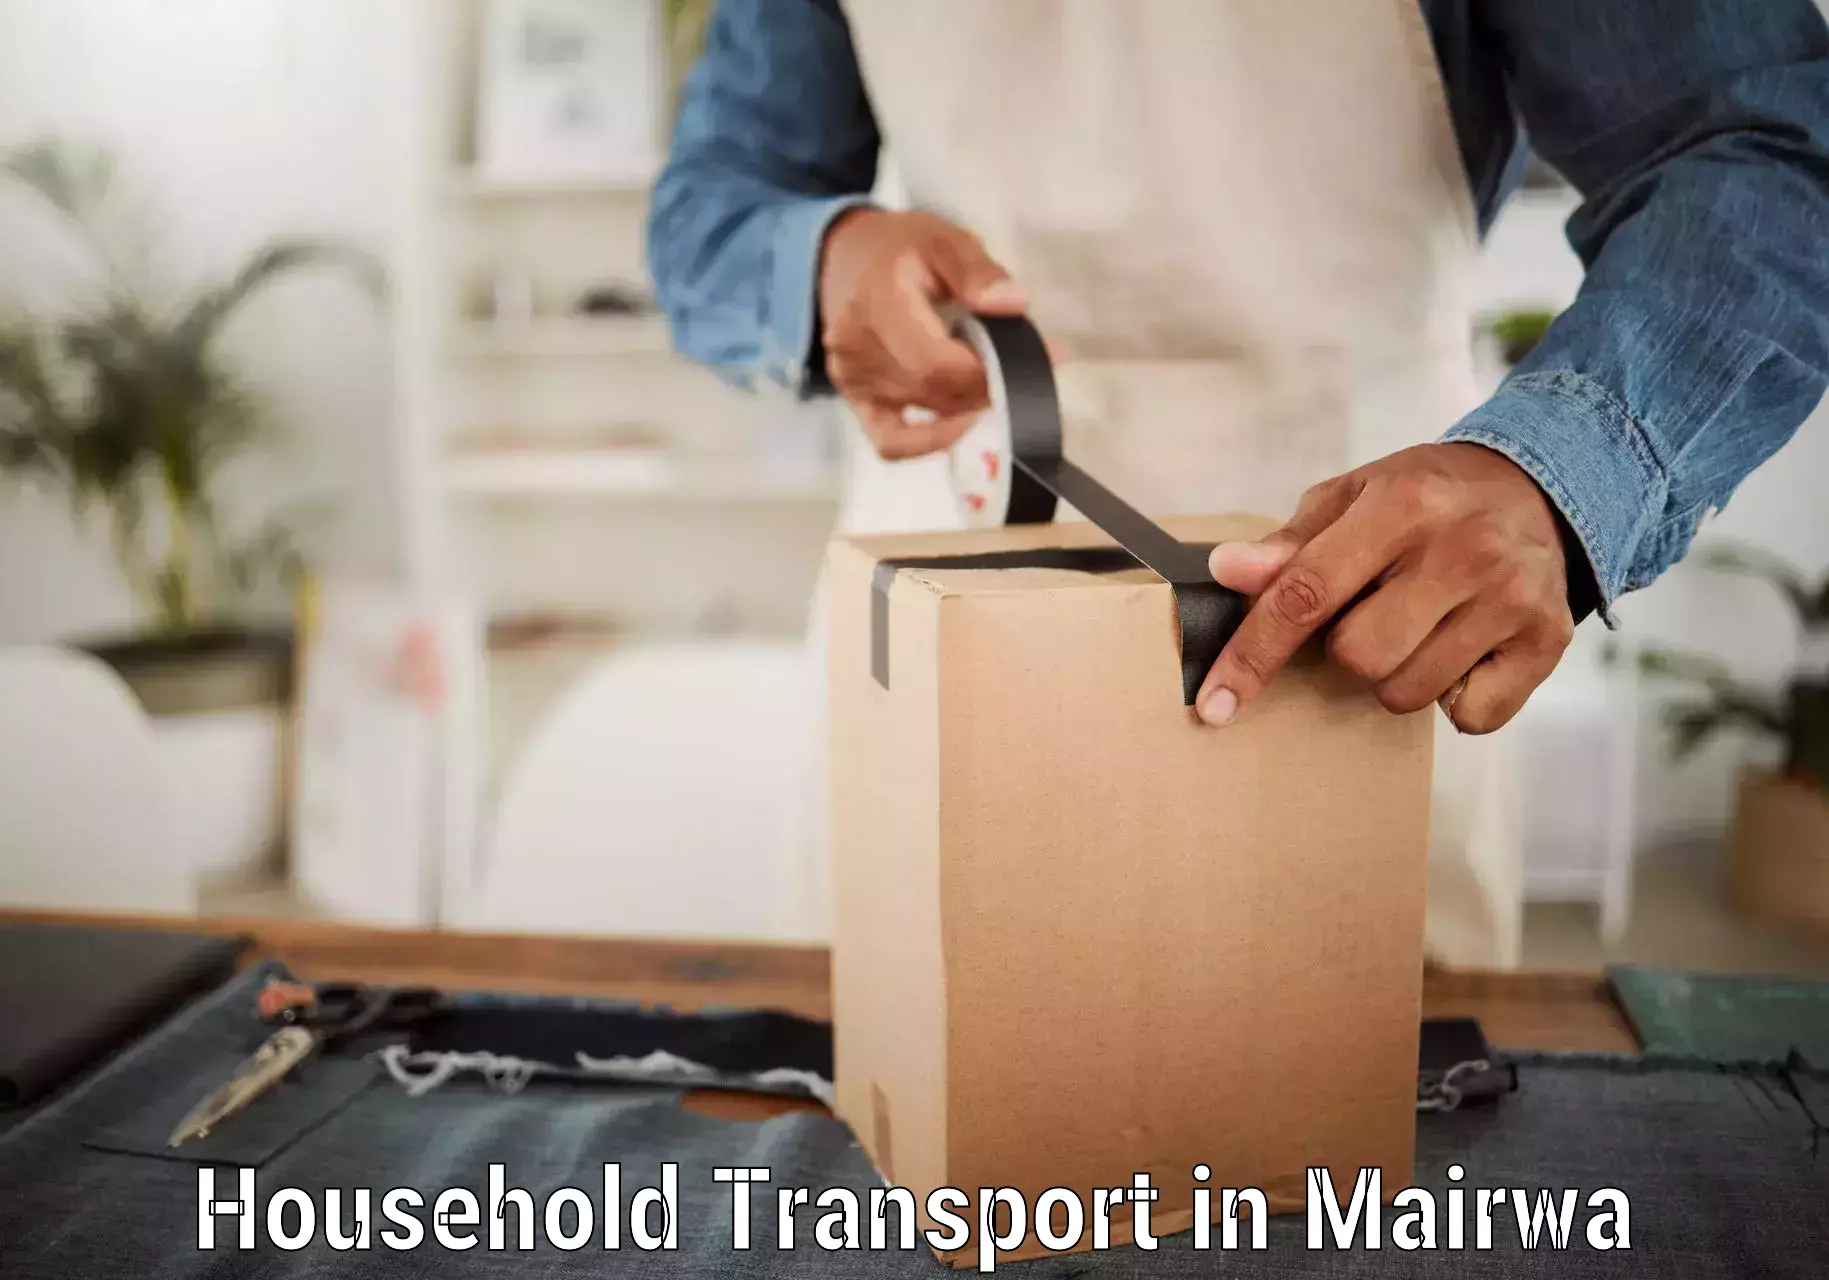 Household transport experts in Mairwa